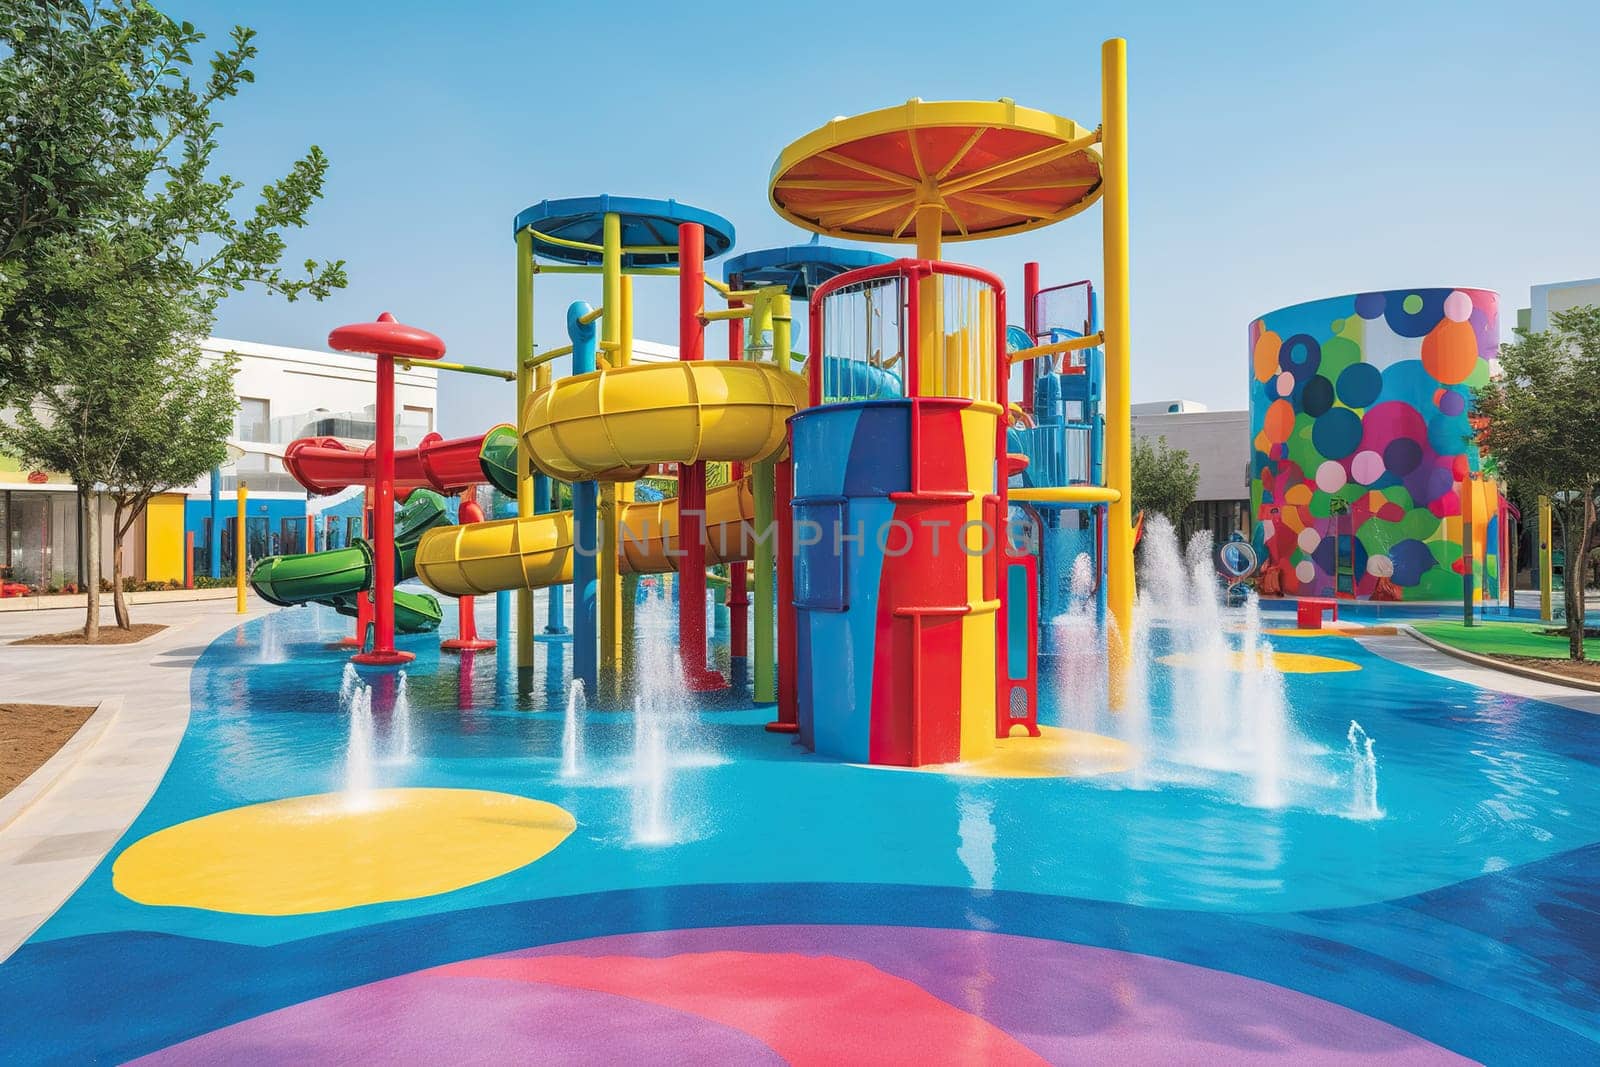 Colorful Water Park With Slides And Attractions Offers Water Entertainment For Children by GekaSkr